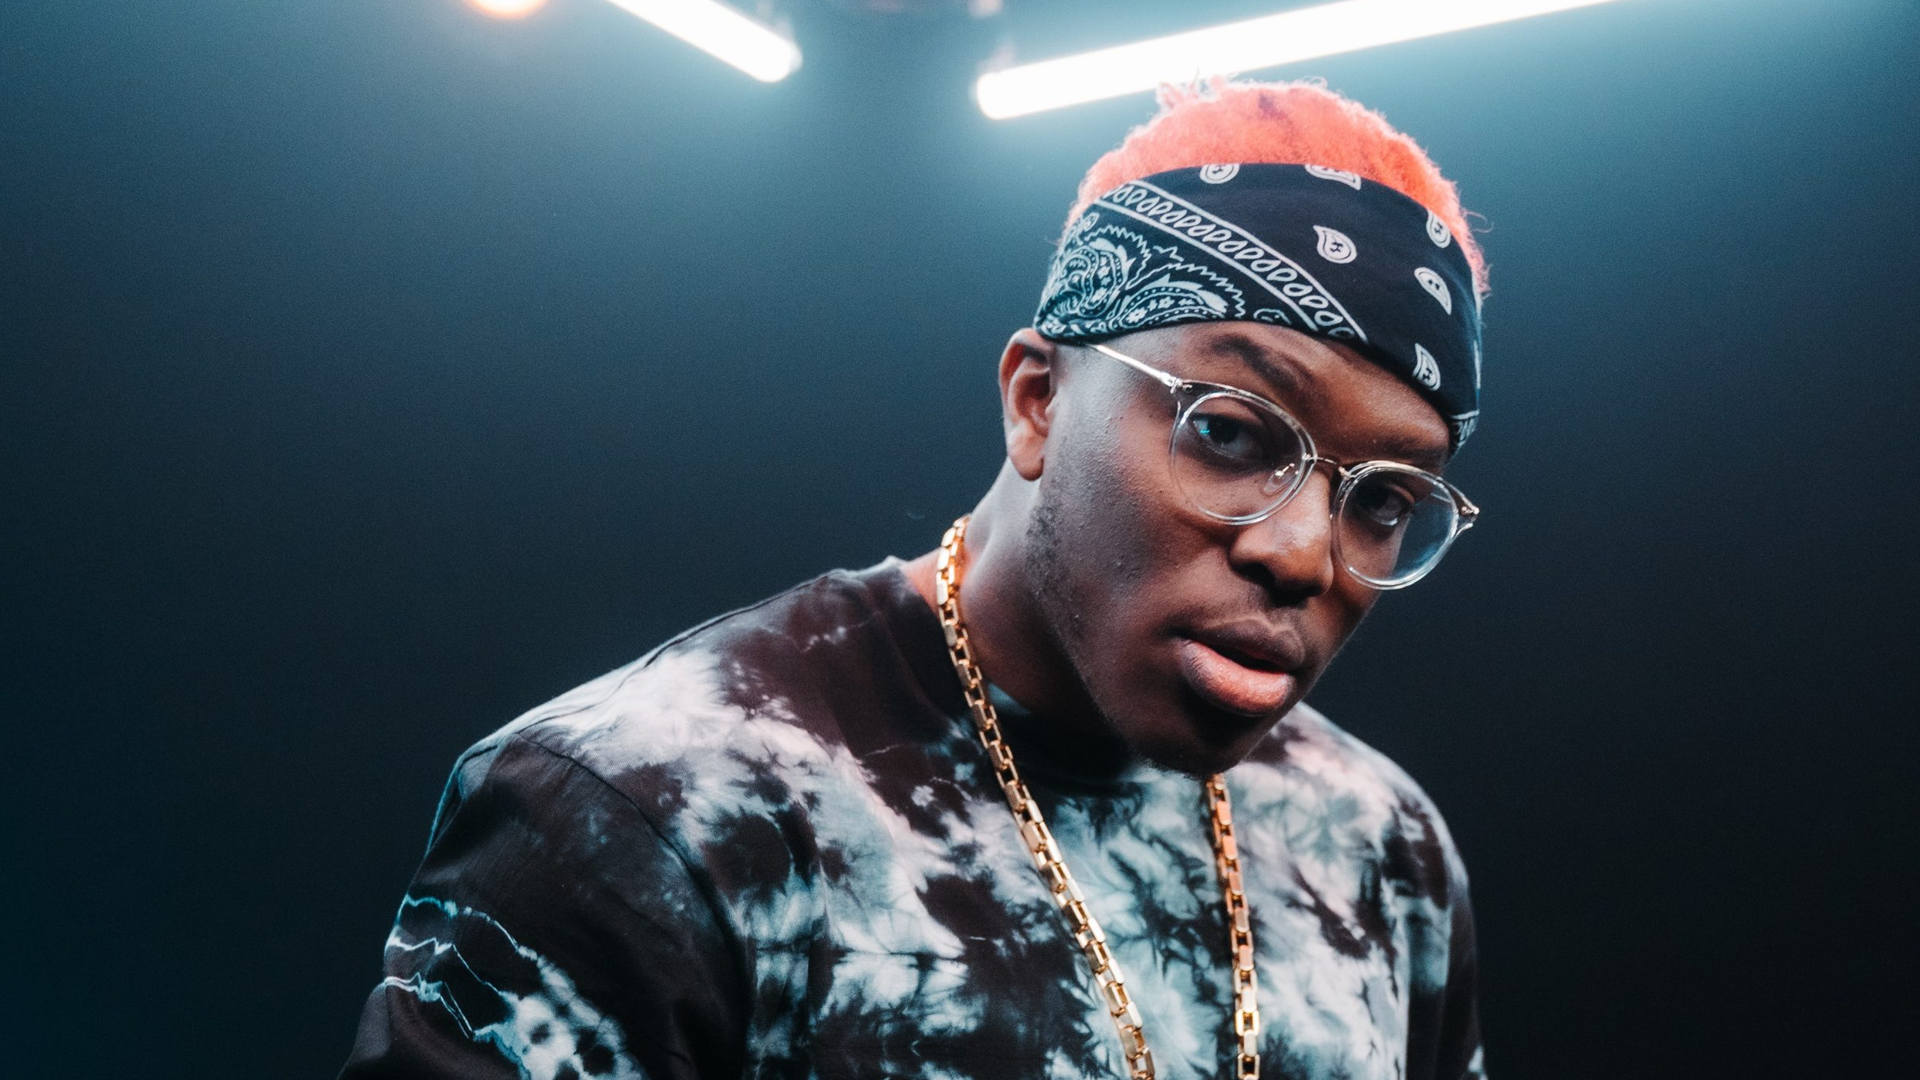 KSI’s Dissimulation brings YouTube trap to the mainstream